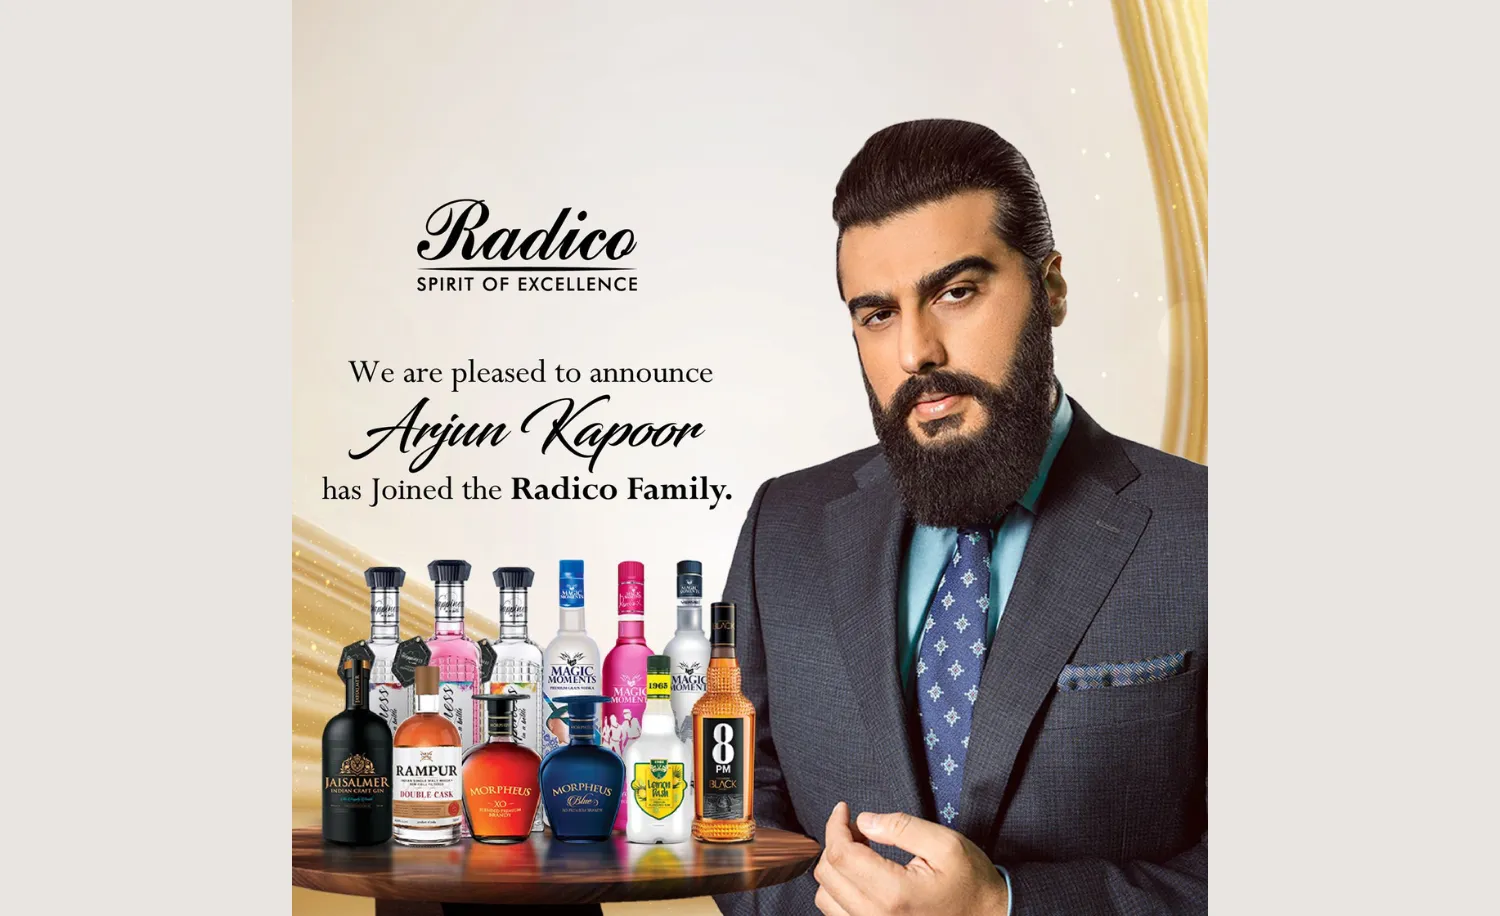 Radico teams up with Arjun Kapoor for its Premium Brands